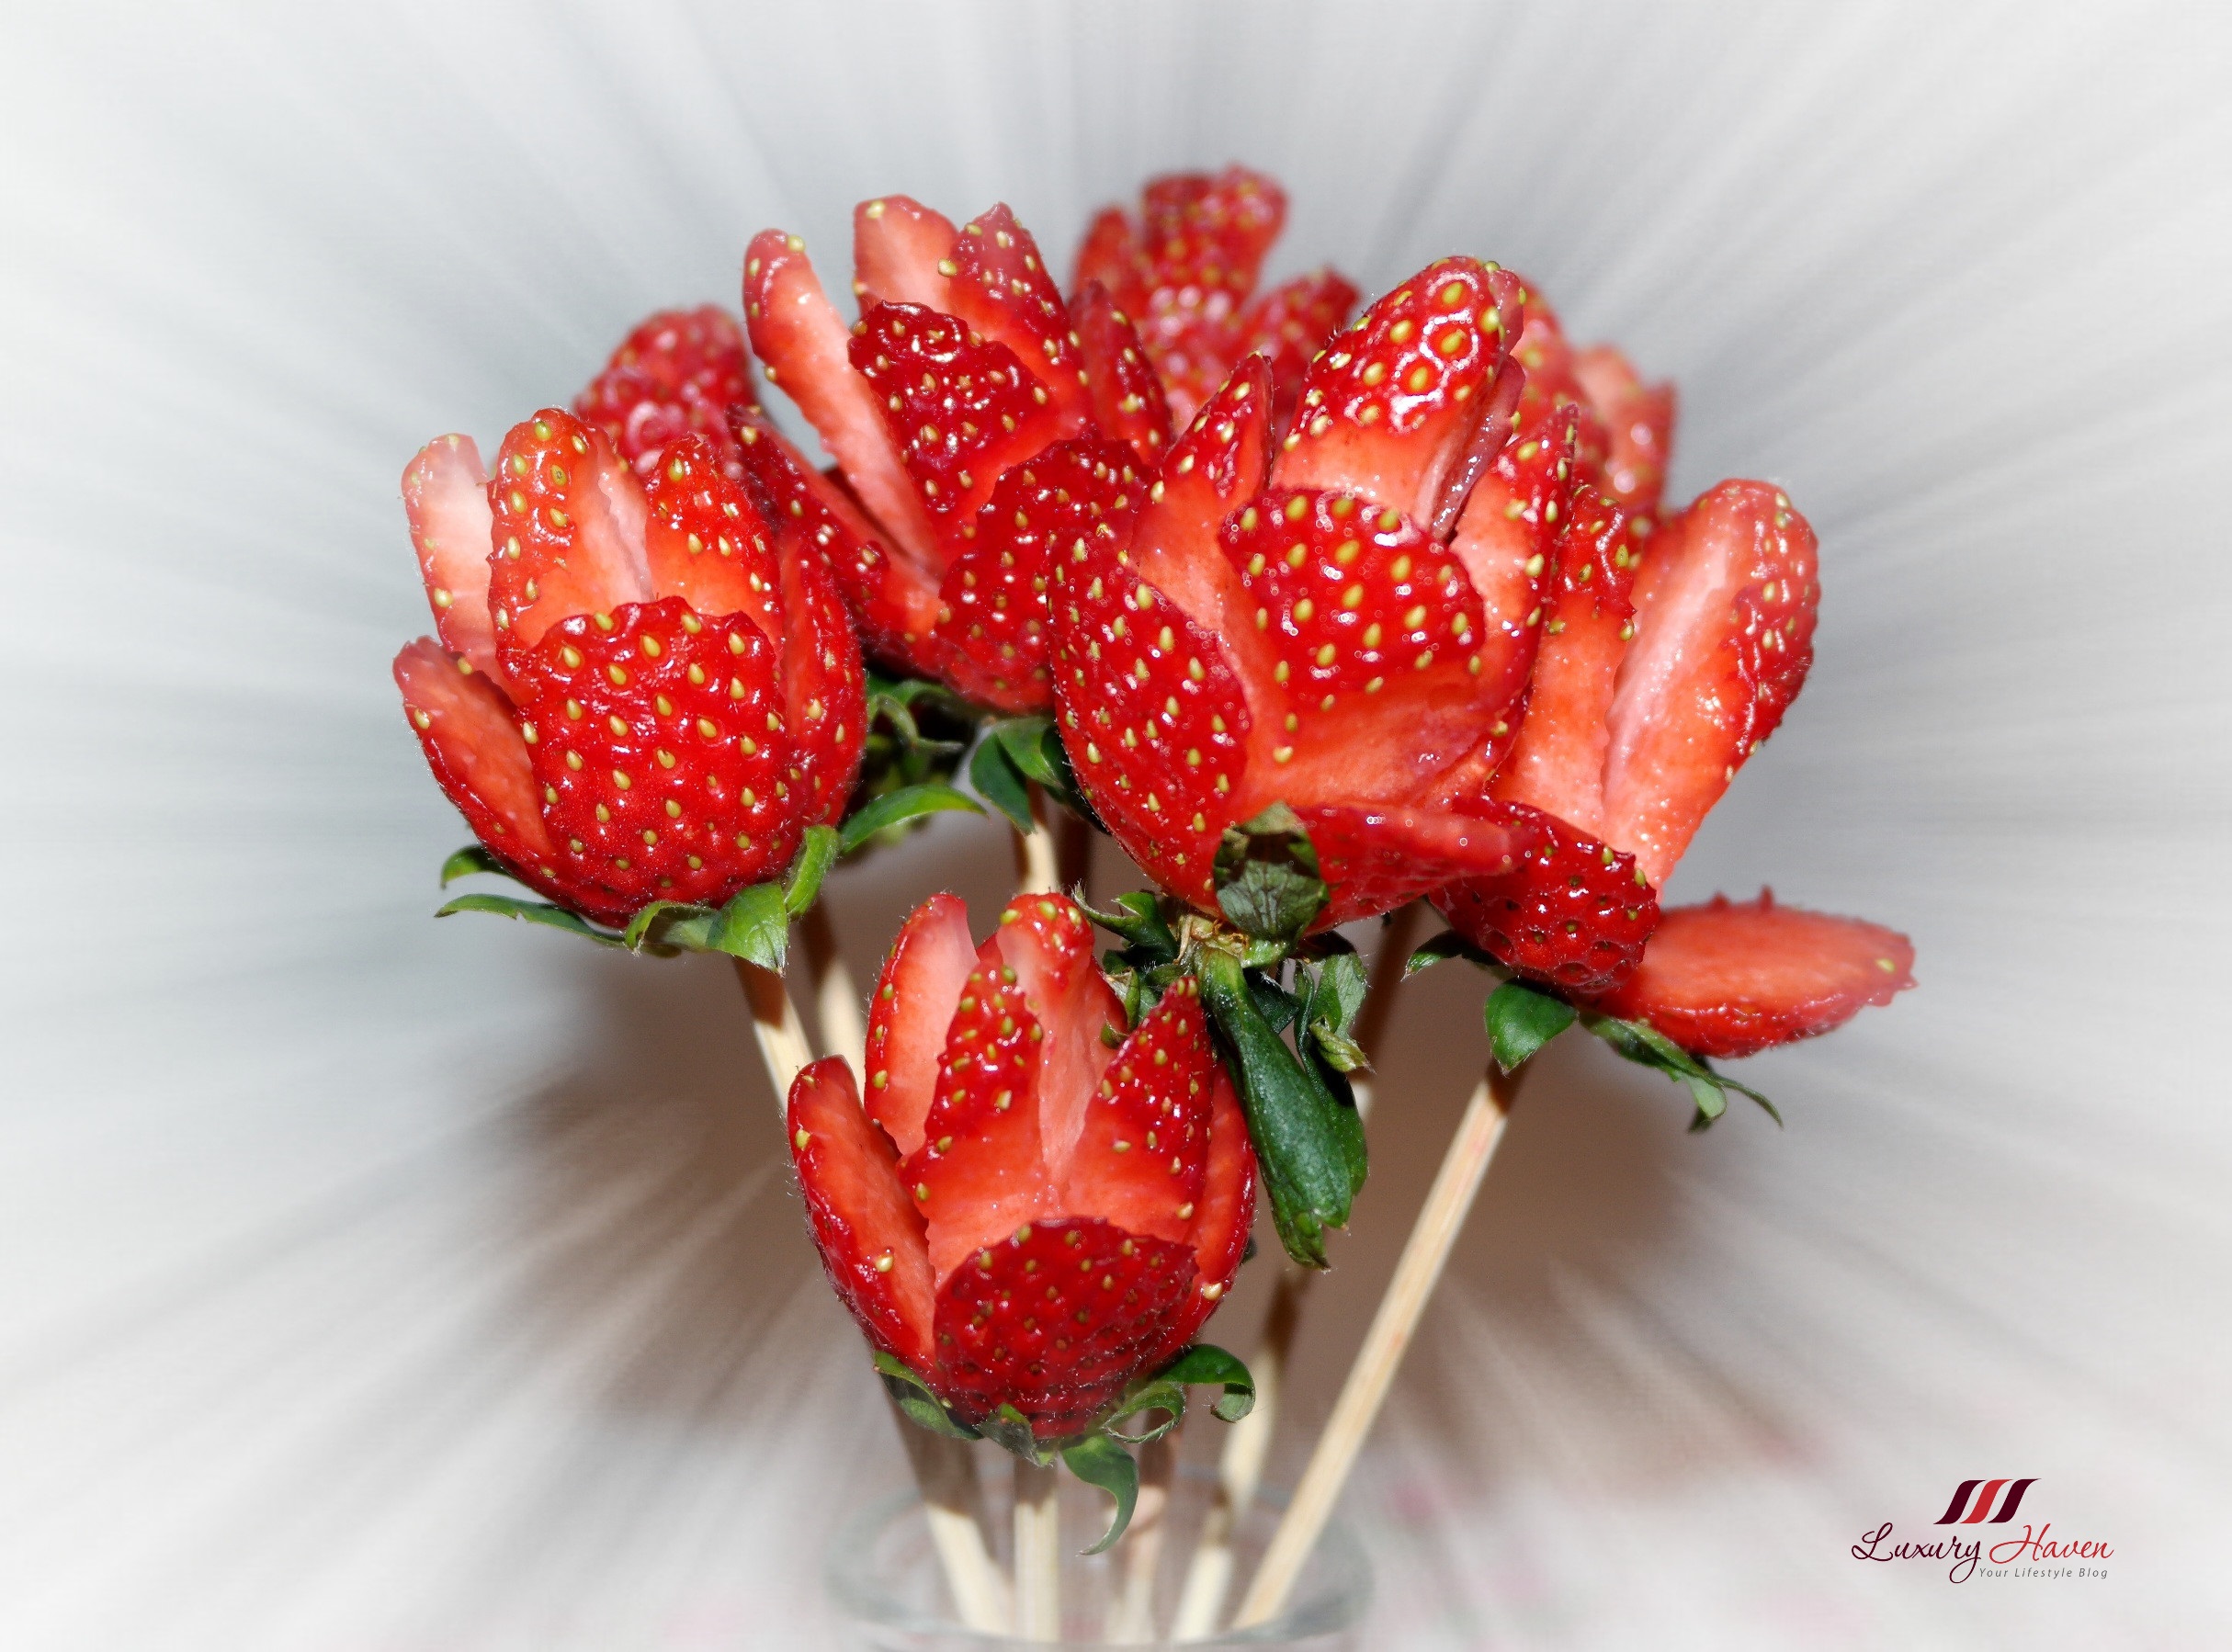 Foodista | Recipes, Cooking Tips, and Food News | Valentine's Day Strawberry Roses Bouquet2429 x 1798